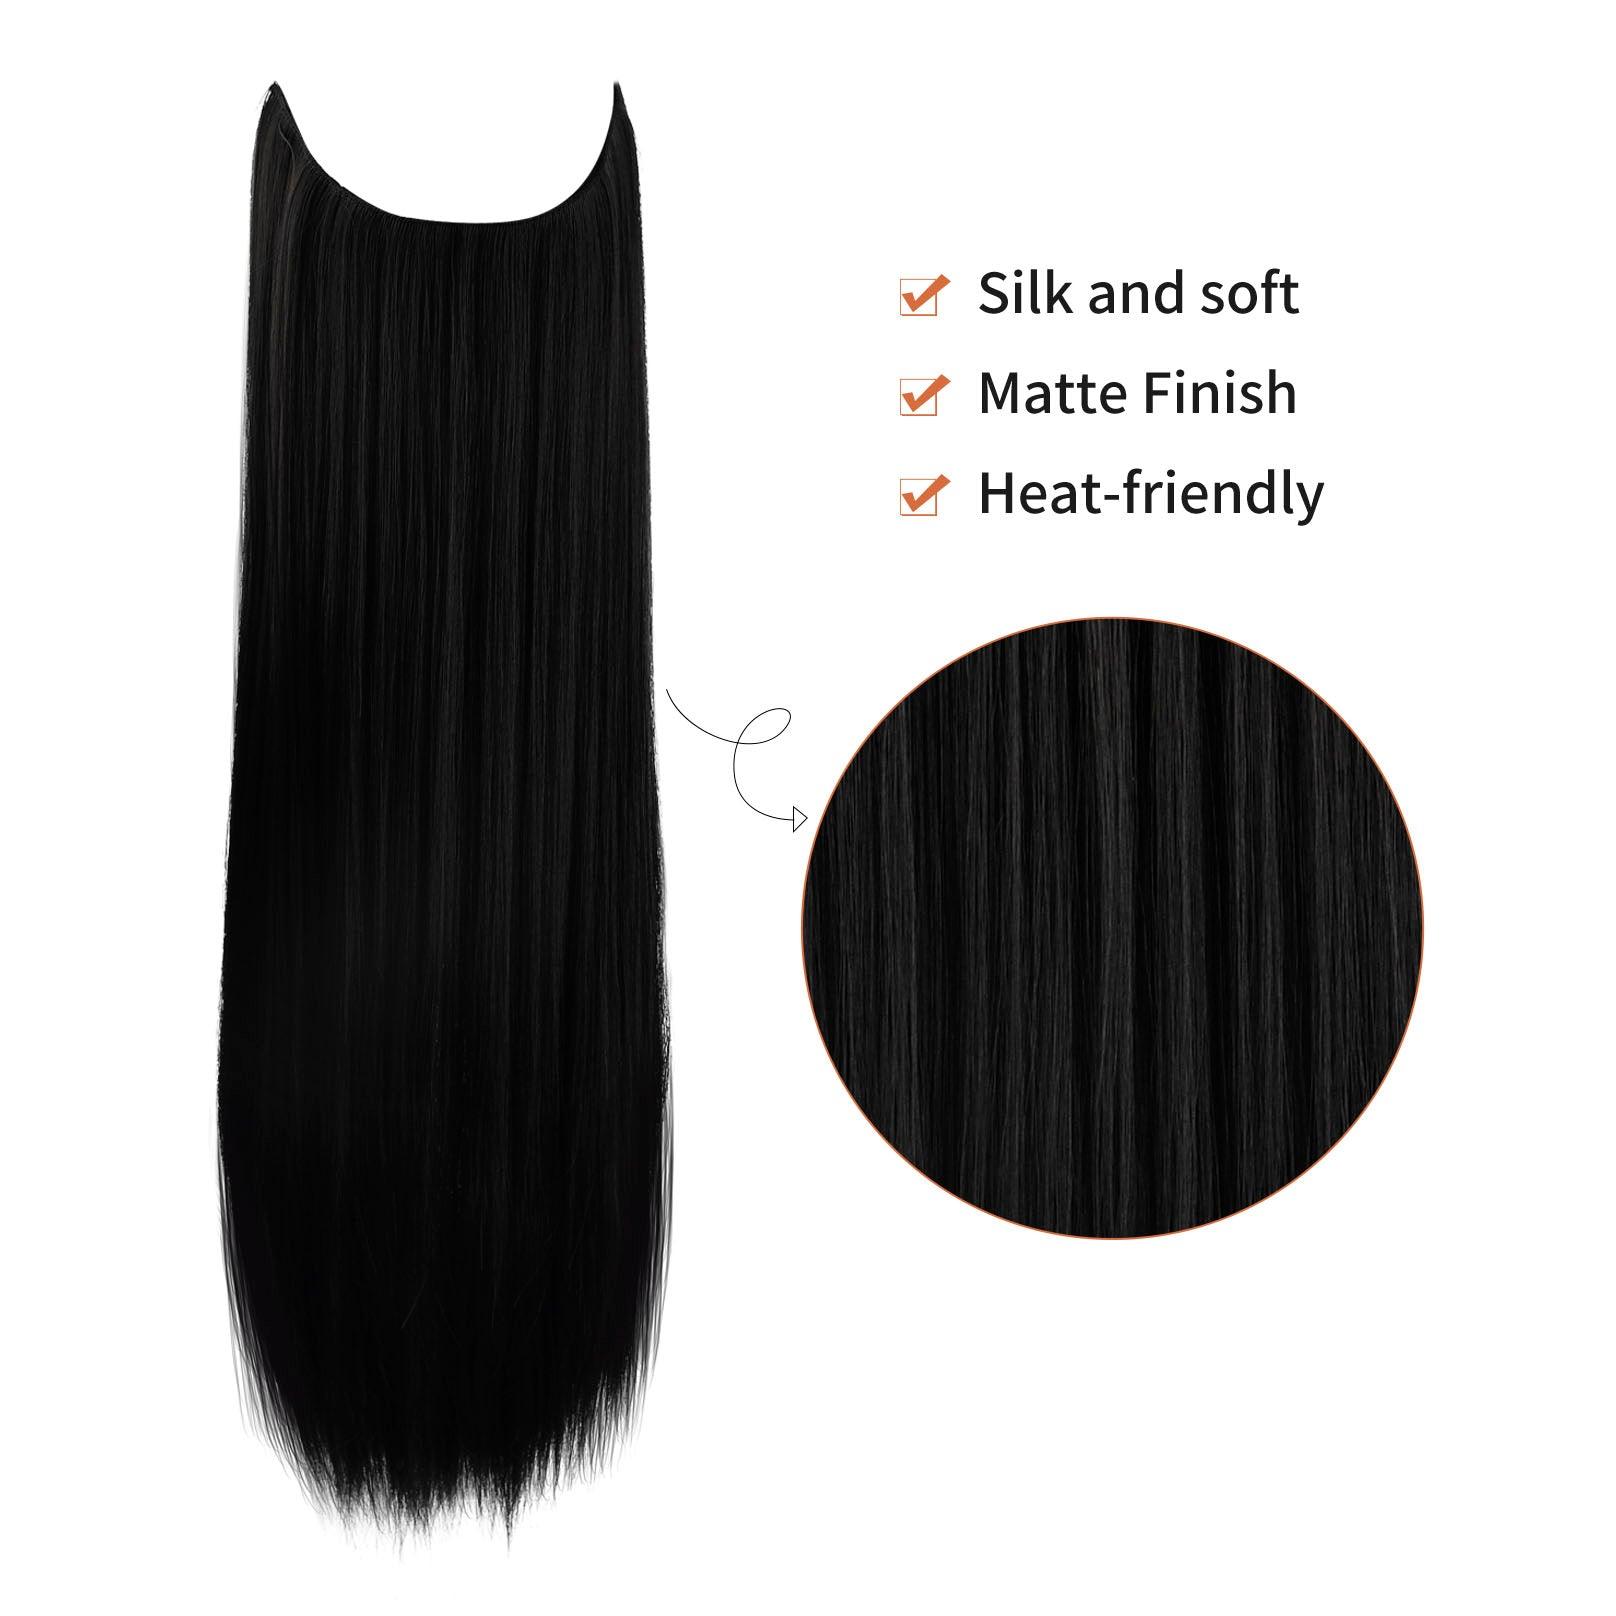 REECHO HAIR Halo Hair Extensions with Invisible Transparent Wire Adjustable Size Removable Secure Clips in Straight Secret Hairpiece for Women 24 Inch-Natural Black - REECHO Hair